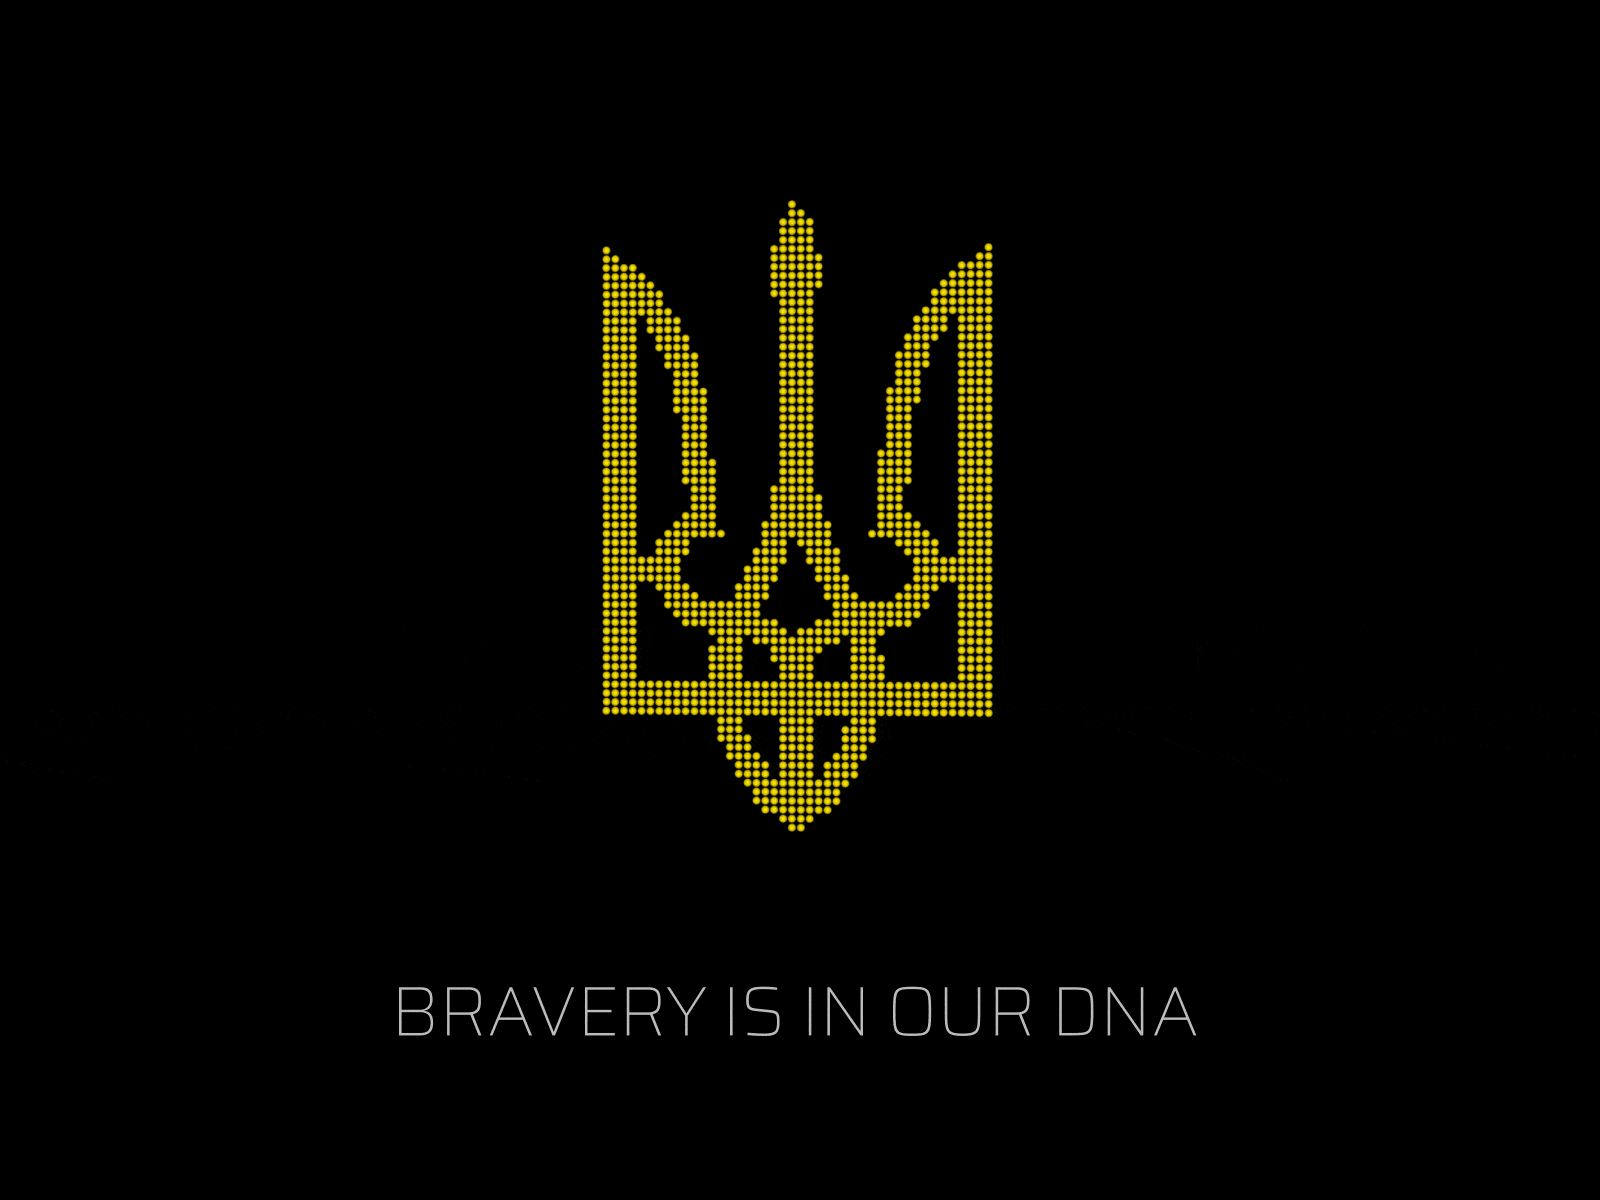 Bravery is in our DNA 🇺🇦